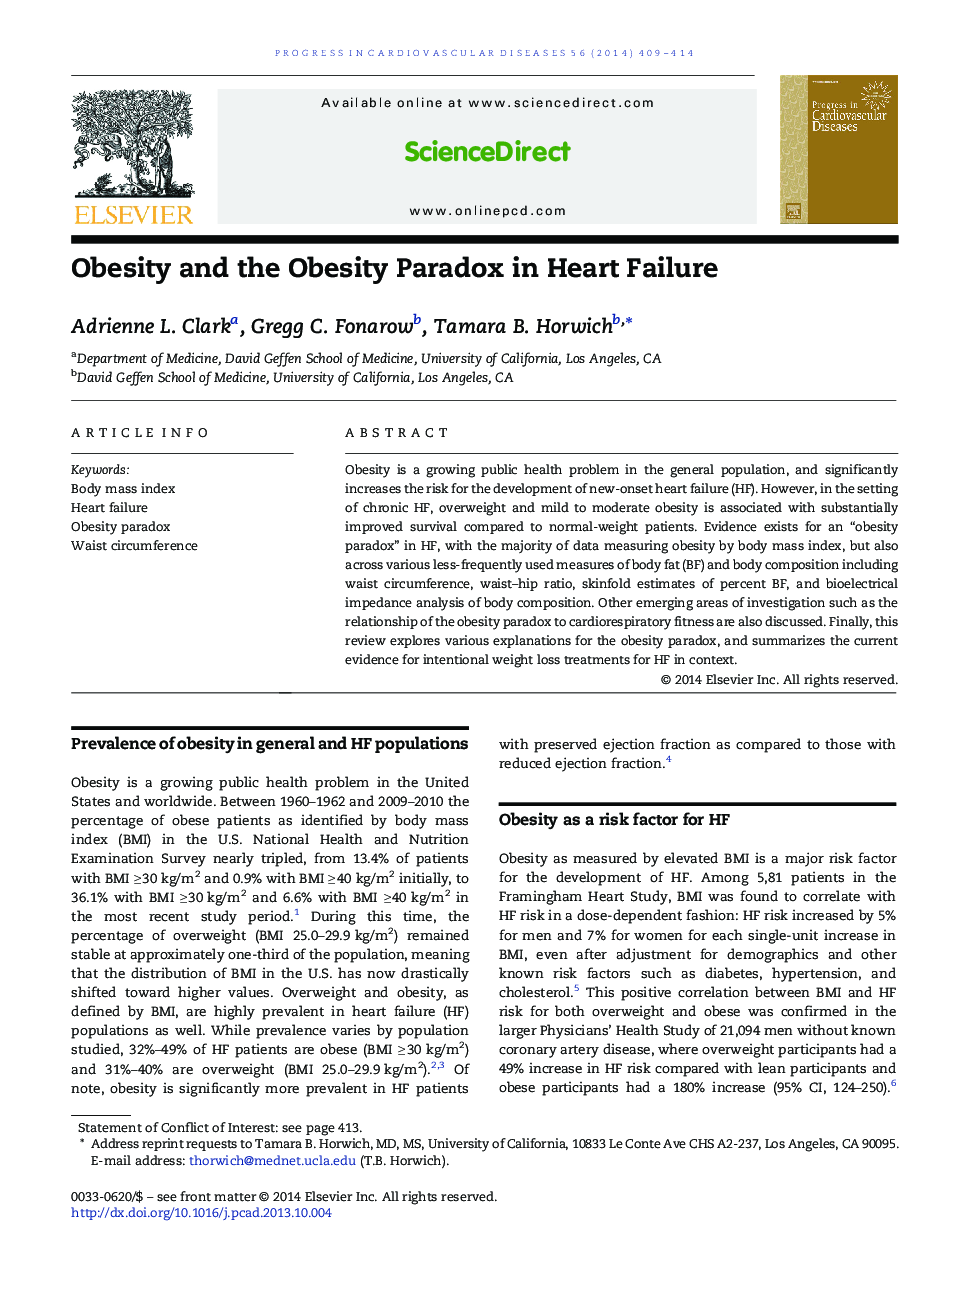 Obesity and the Obesity Paradox in Heart Failure 